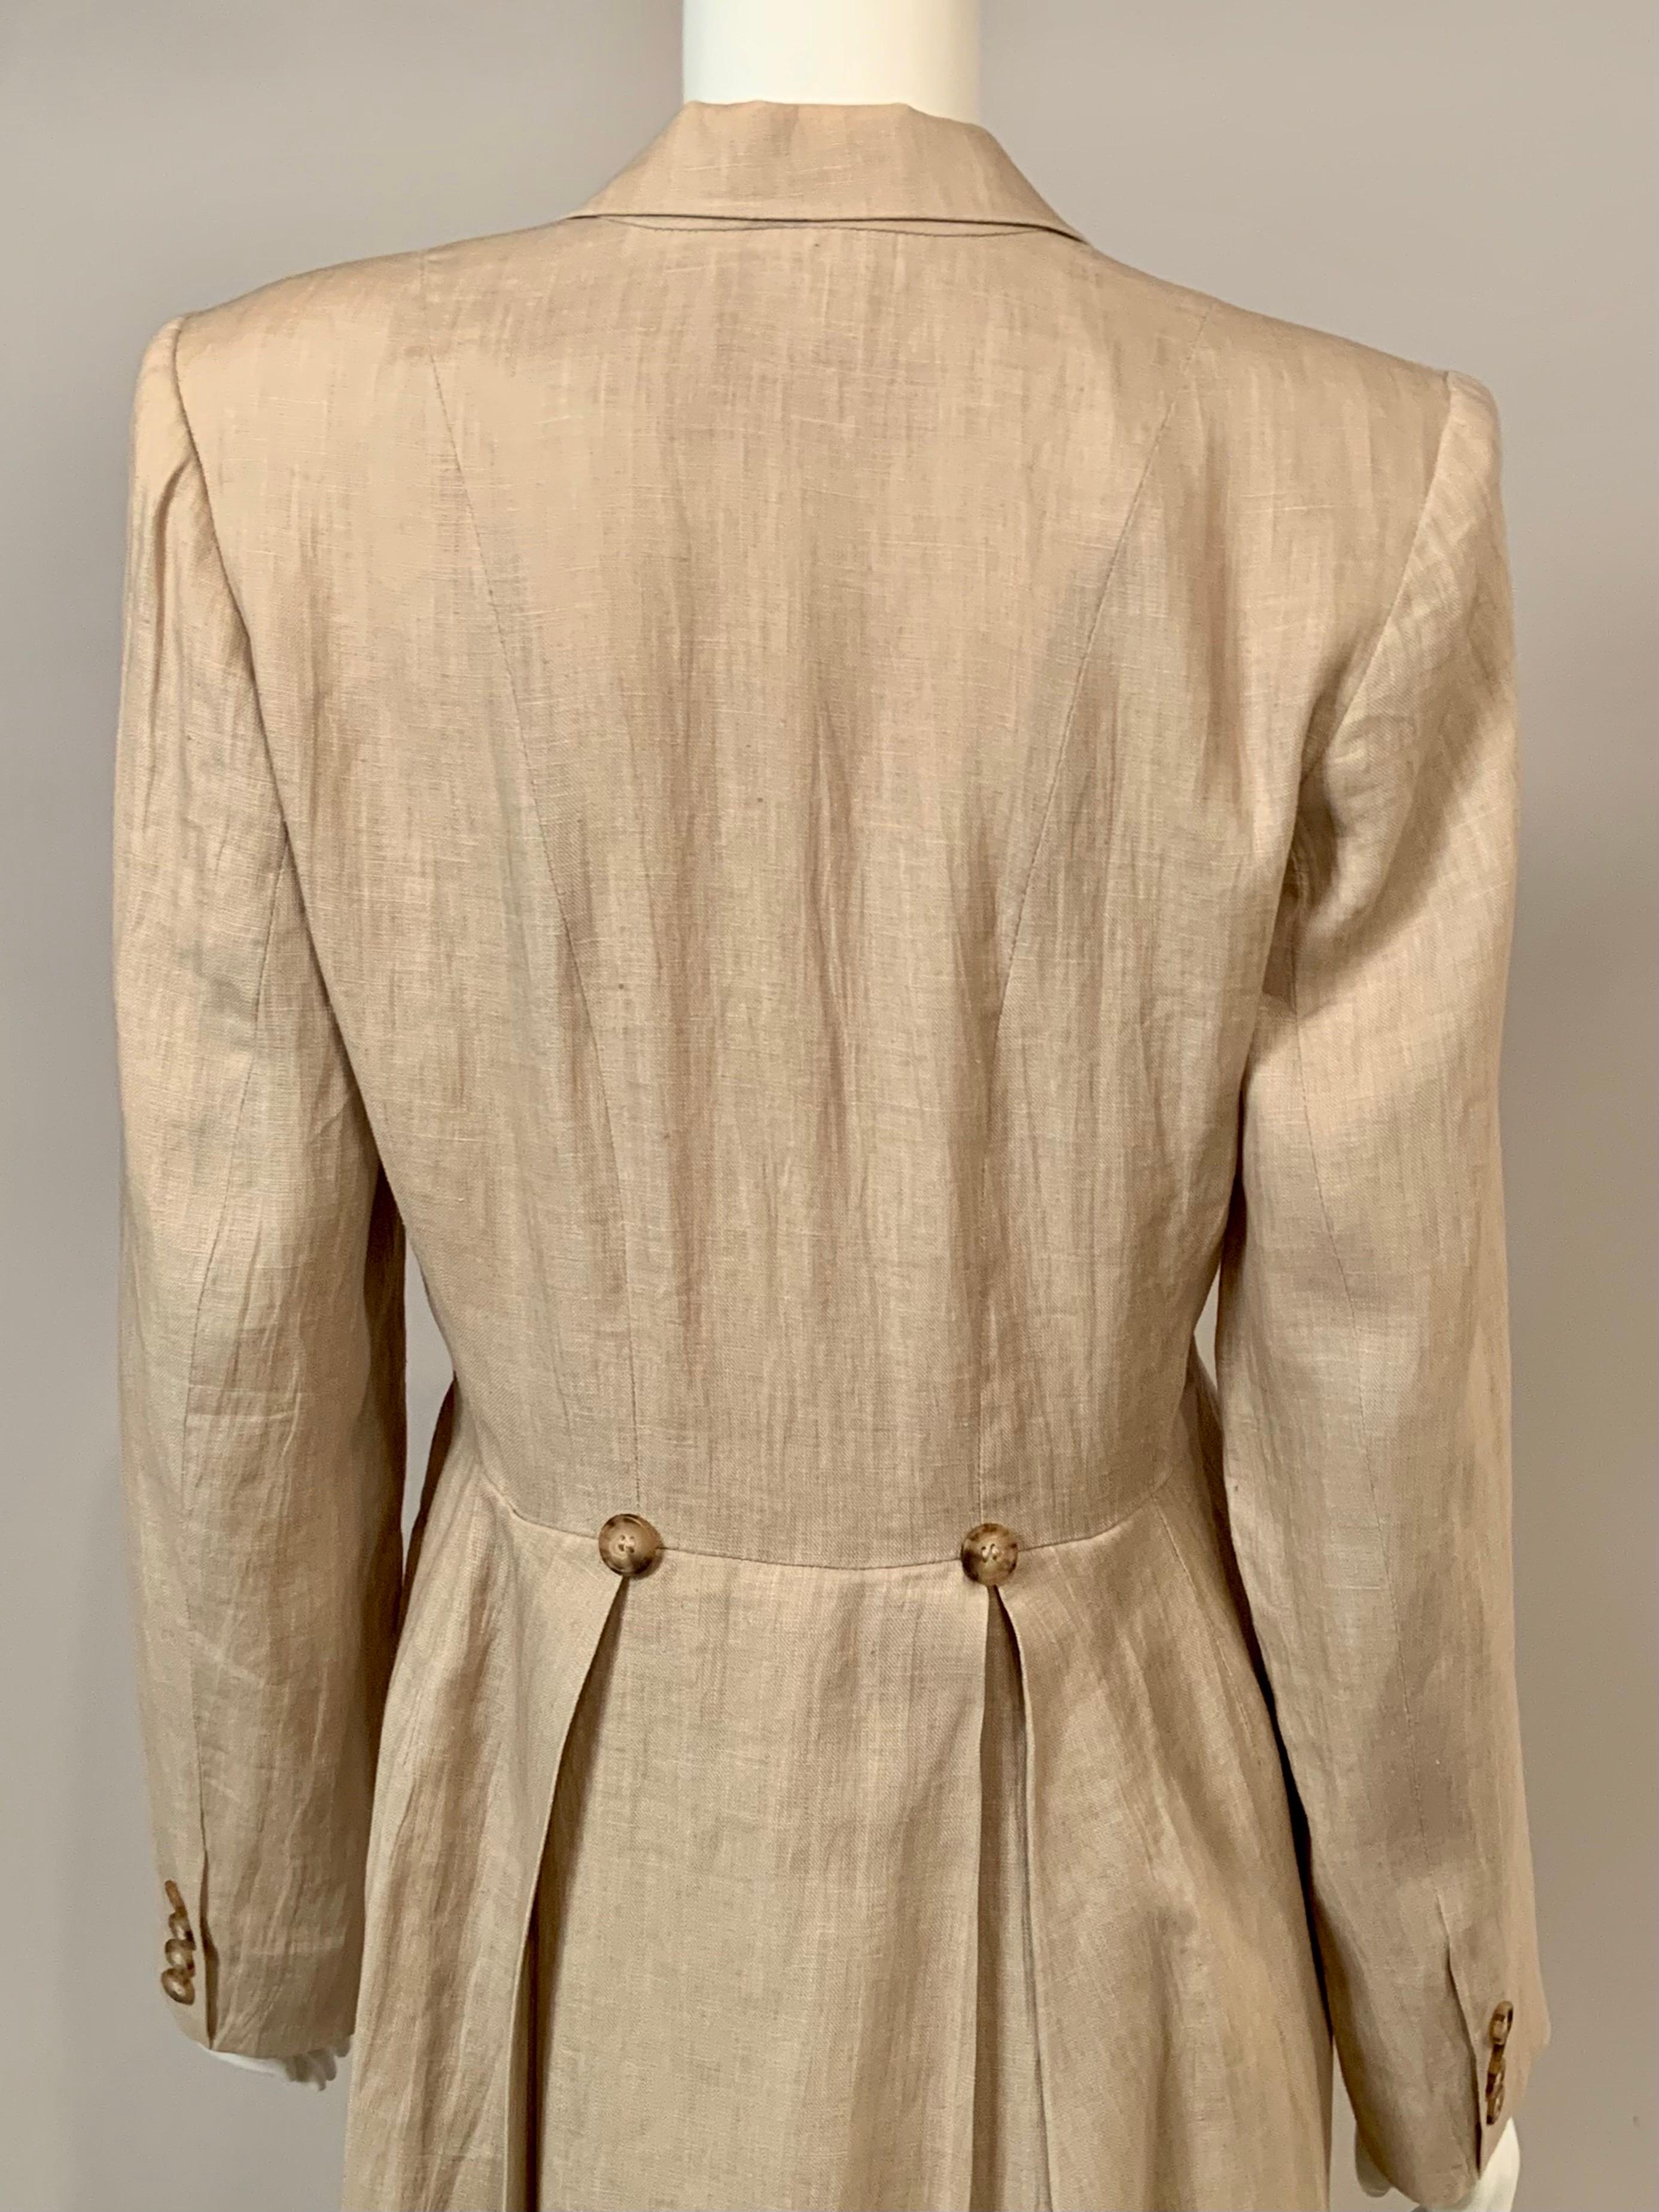 Irish Linen Duster Coat Made in Ireland by Willis & Geiger Outfitters For Sale 3